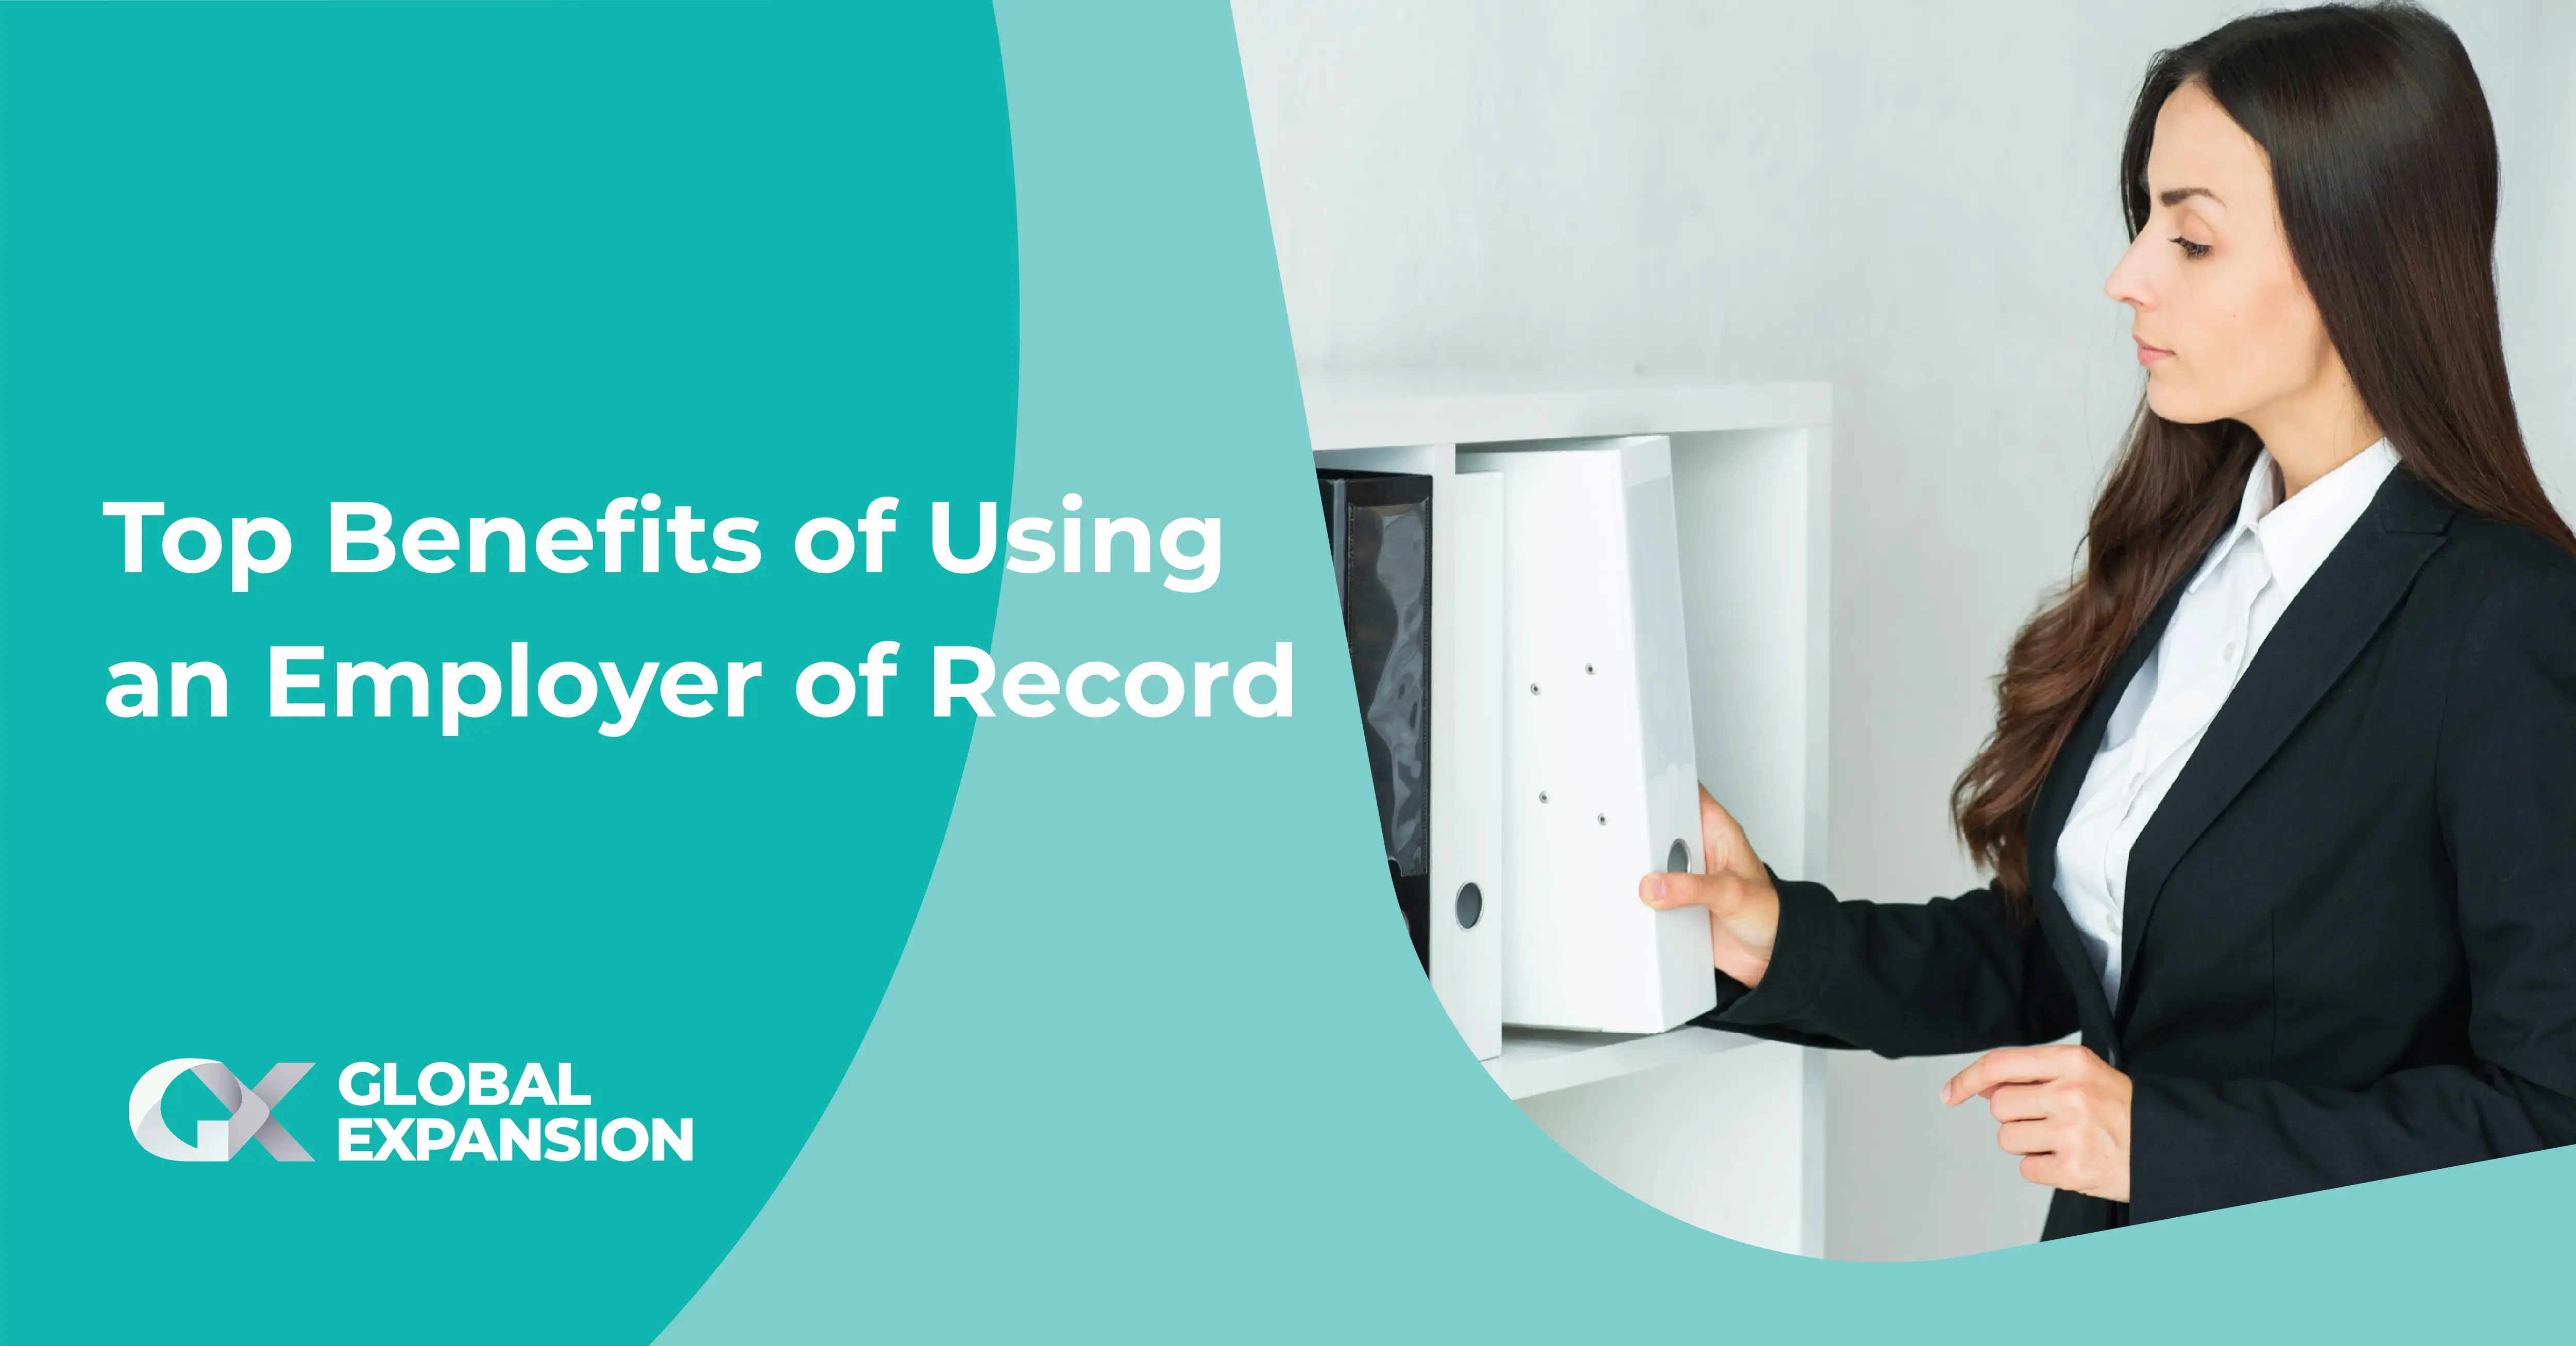 Top Benefits of Using an Employer of Record